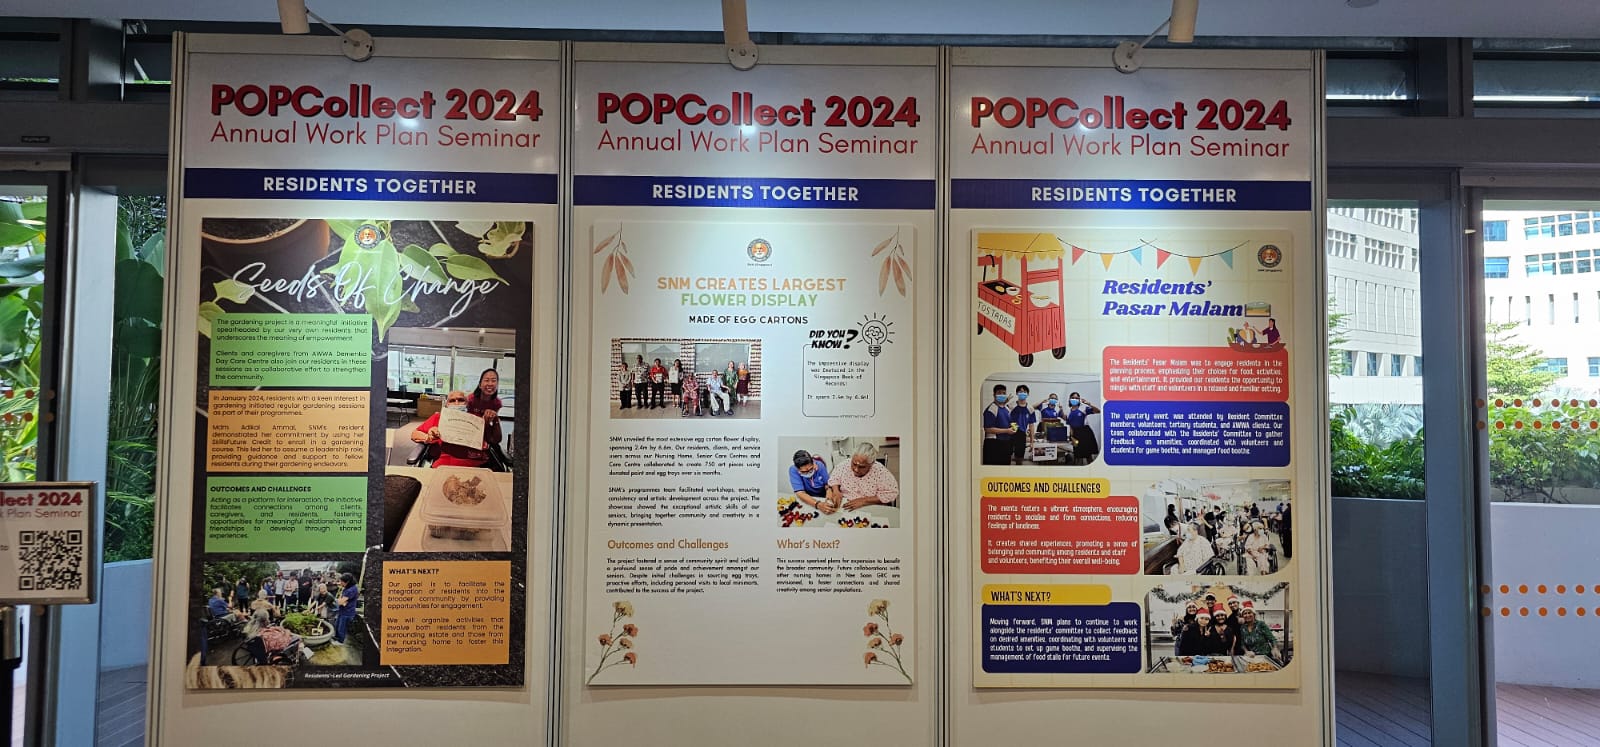 SNM participates in PopCollect Annual Workplan 2024